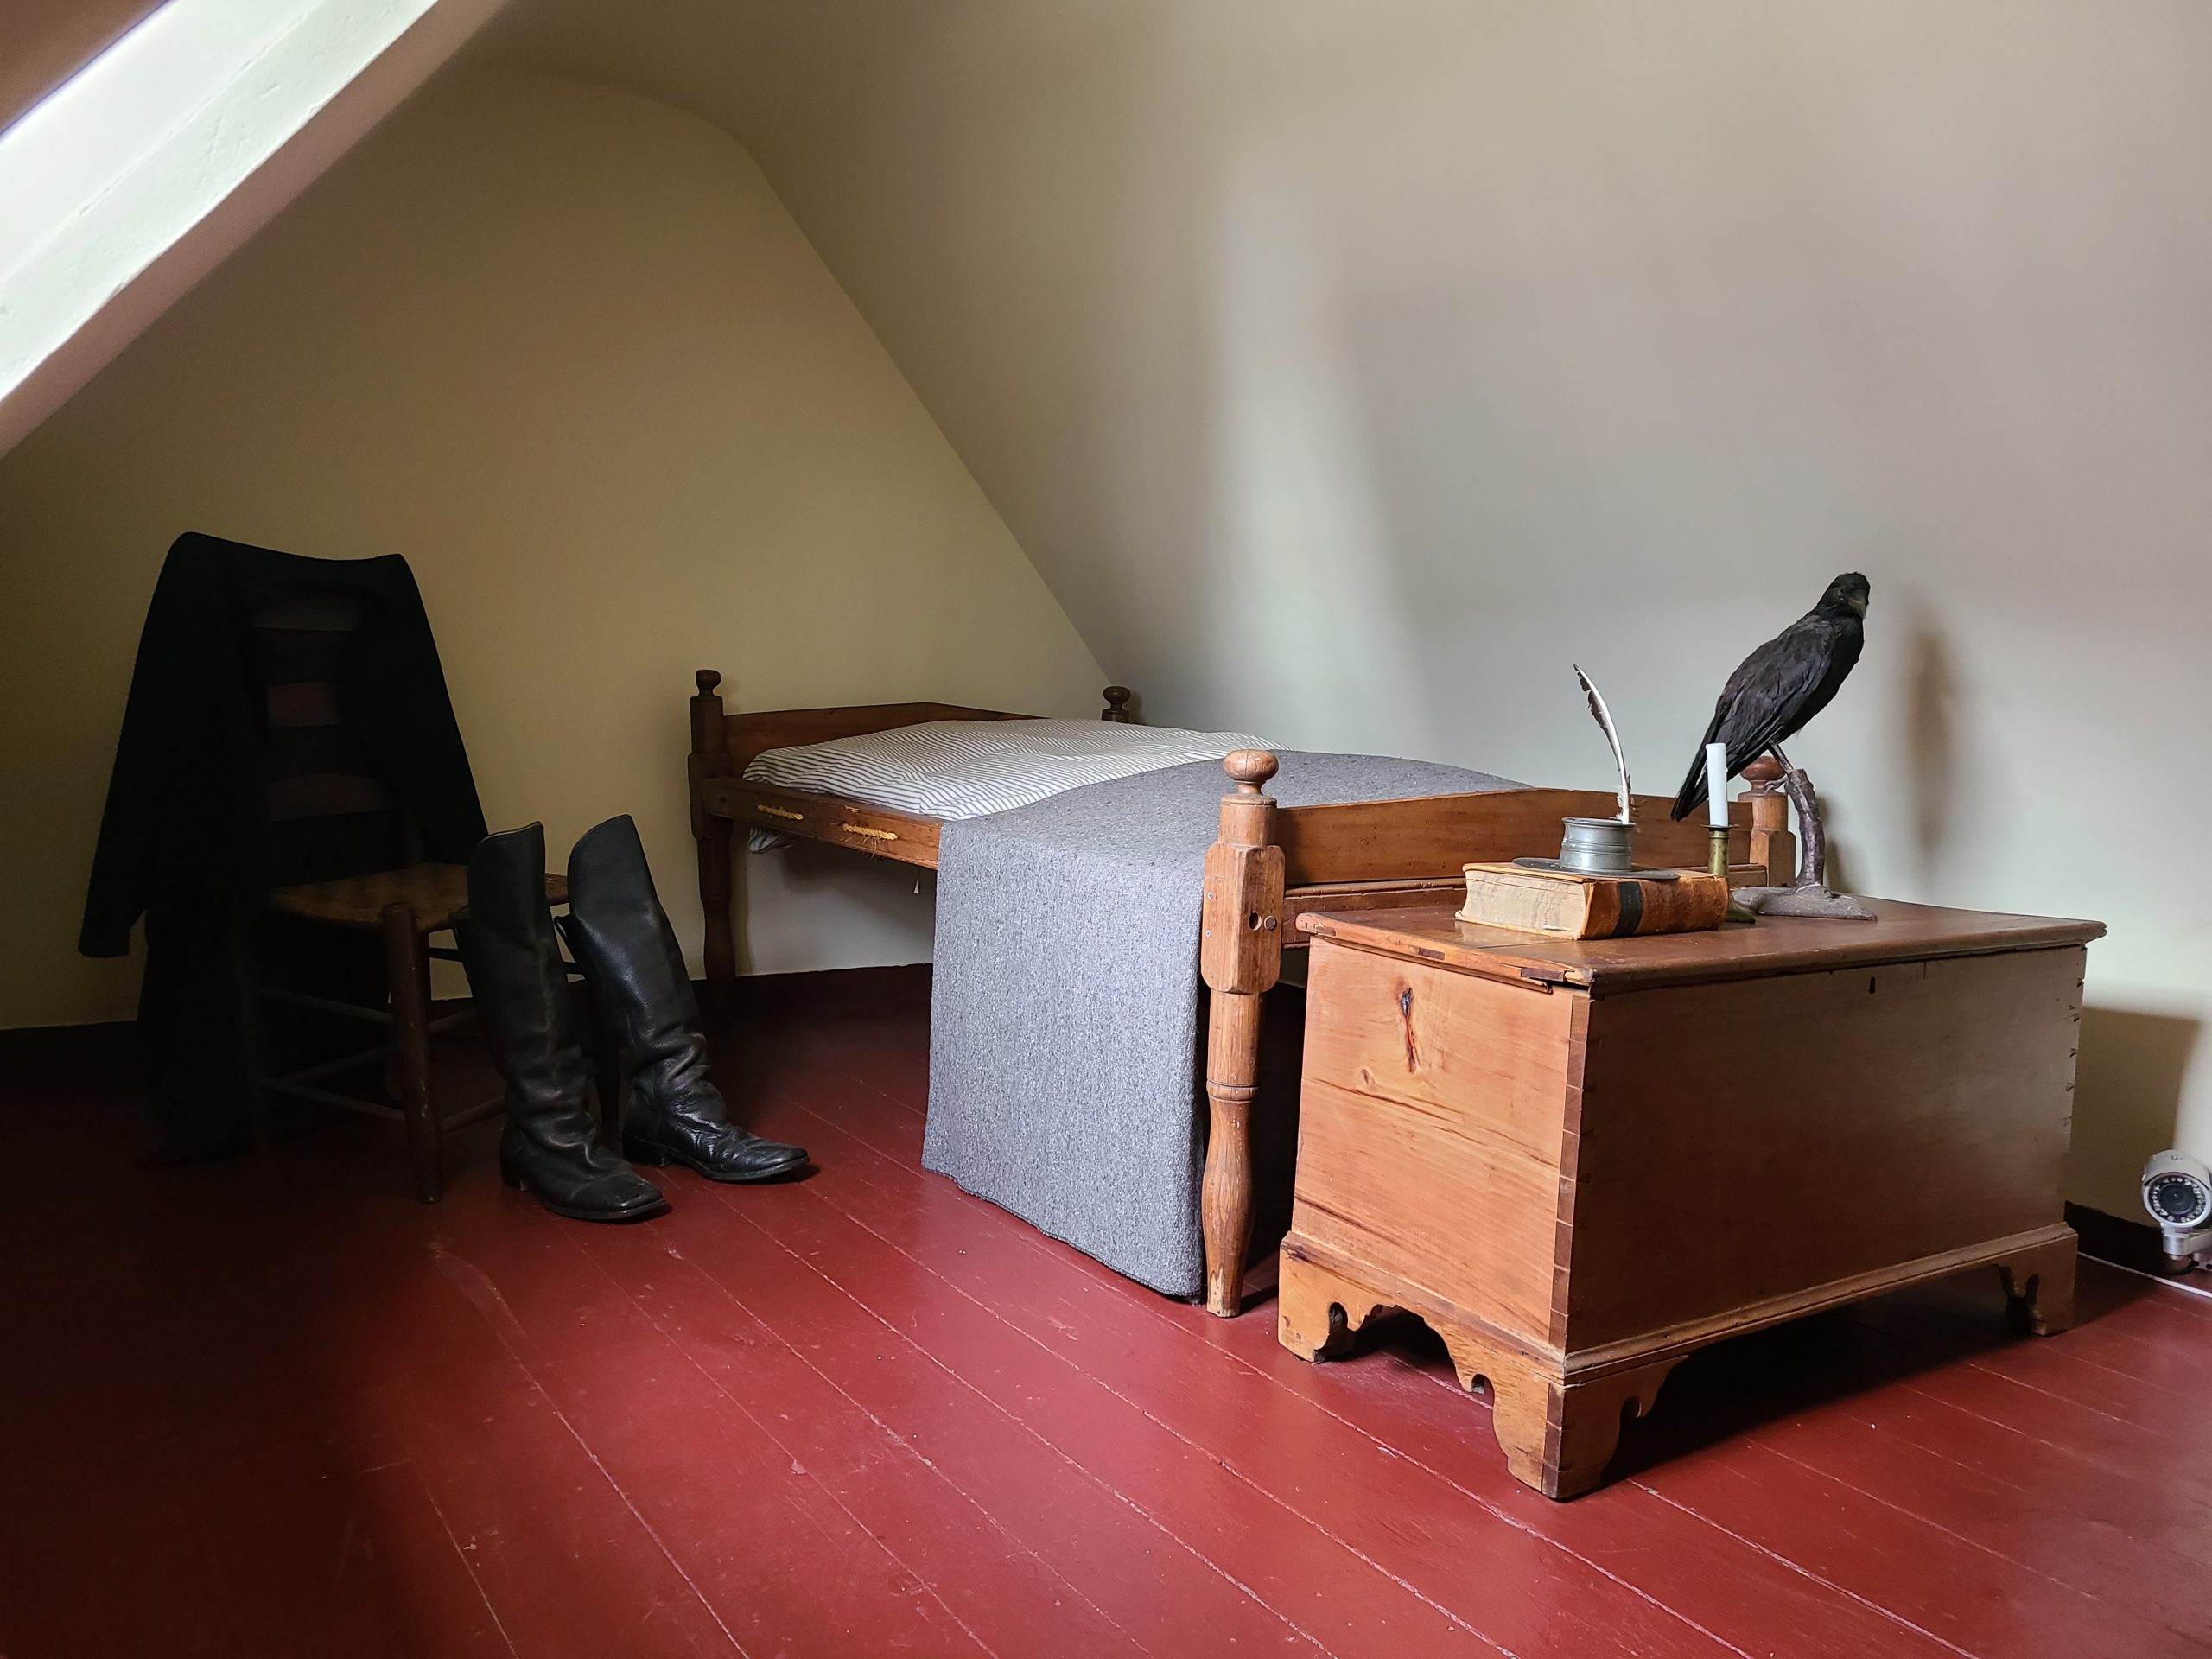 The attic bedroom in the Edgar Allan Poe house, decorated with simple furniture